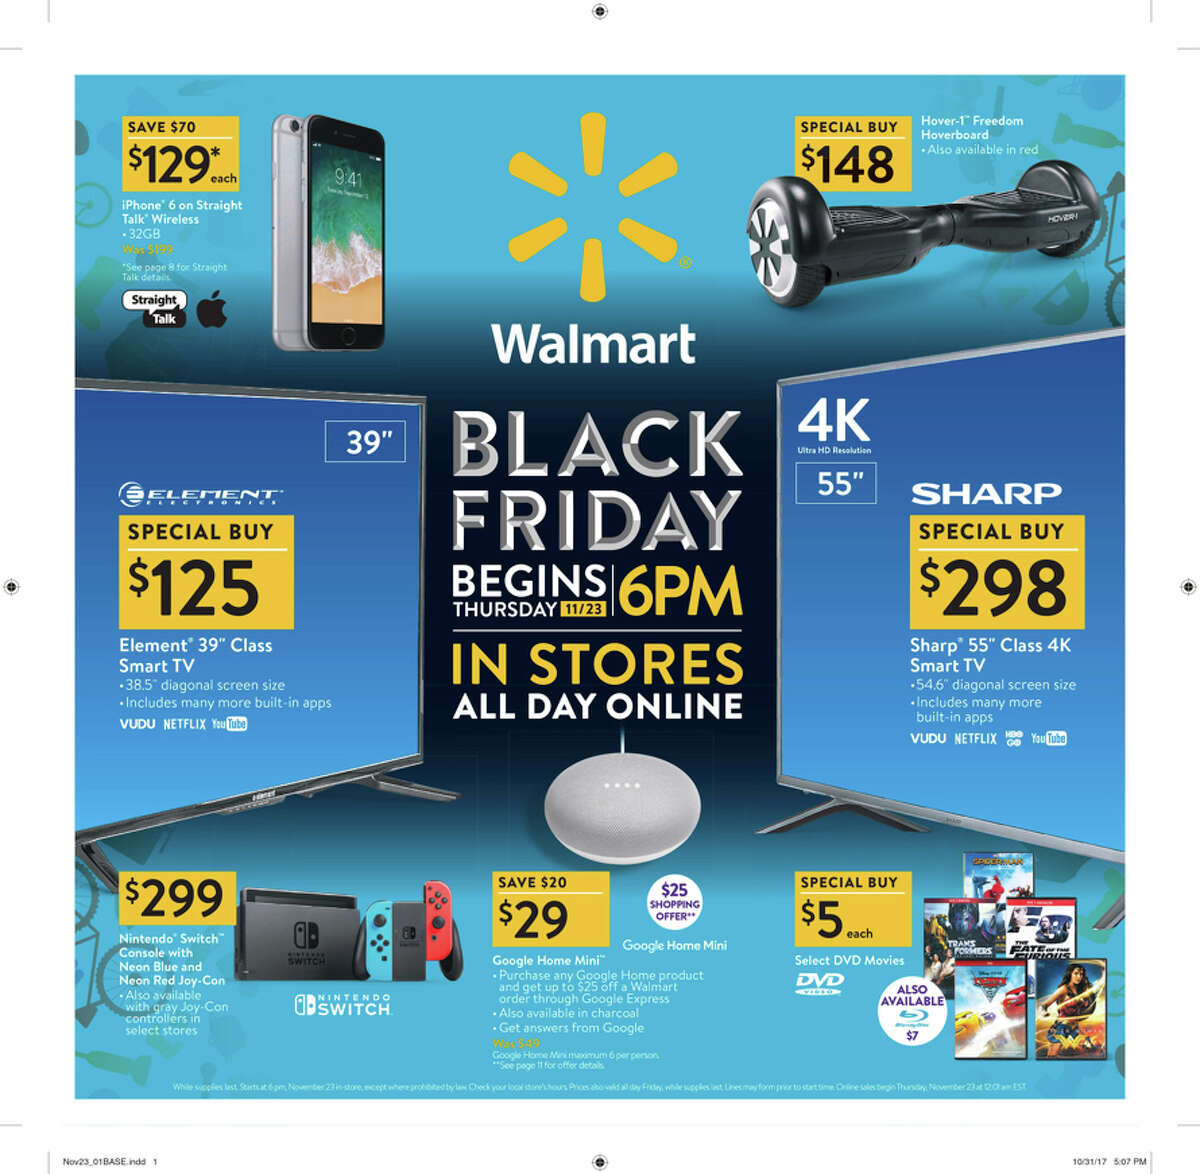 Walmart released their 2017 Black Friday ad circular and its 32 pages are packed with some of the season's top deals.